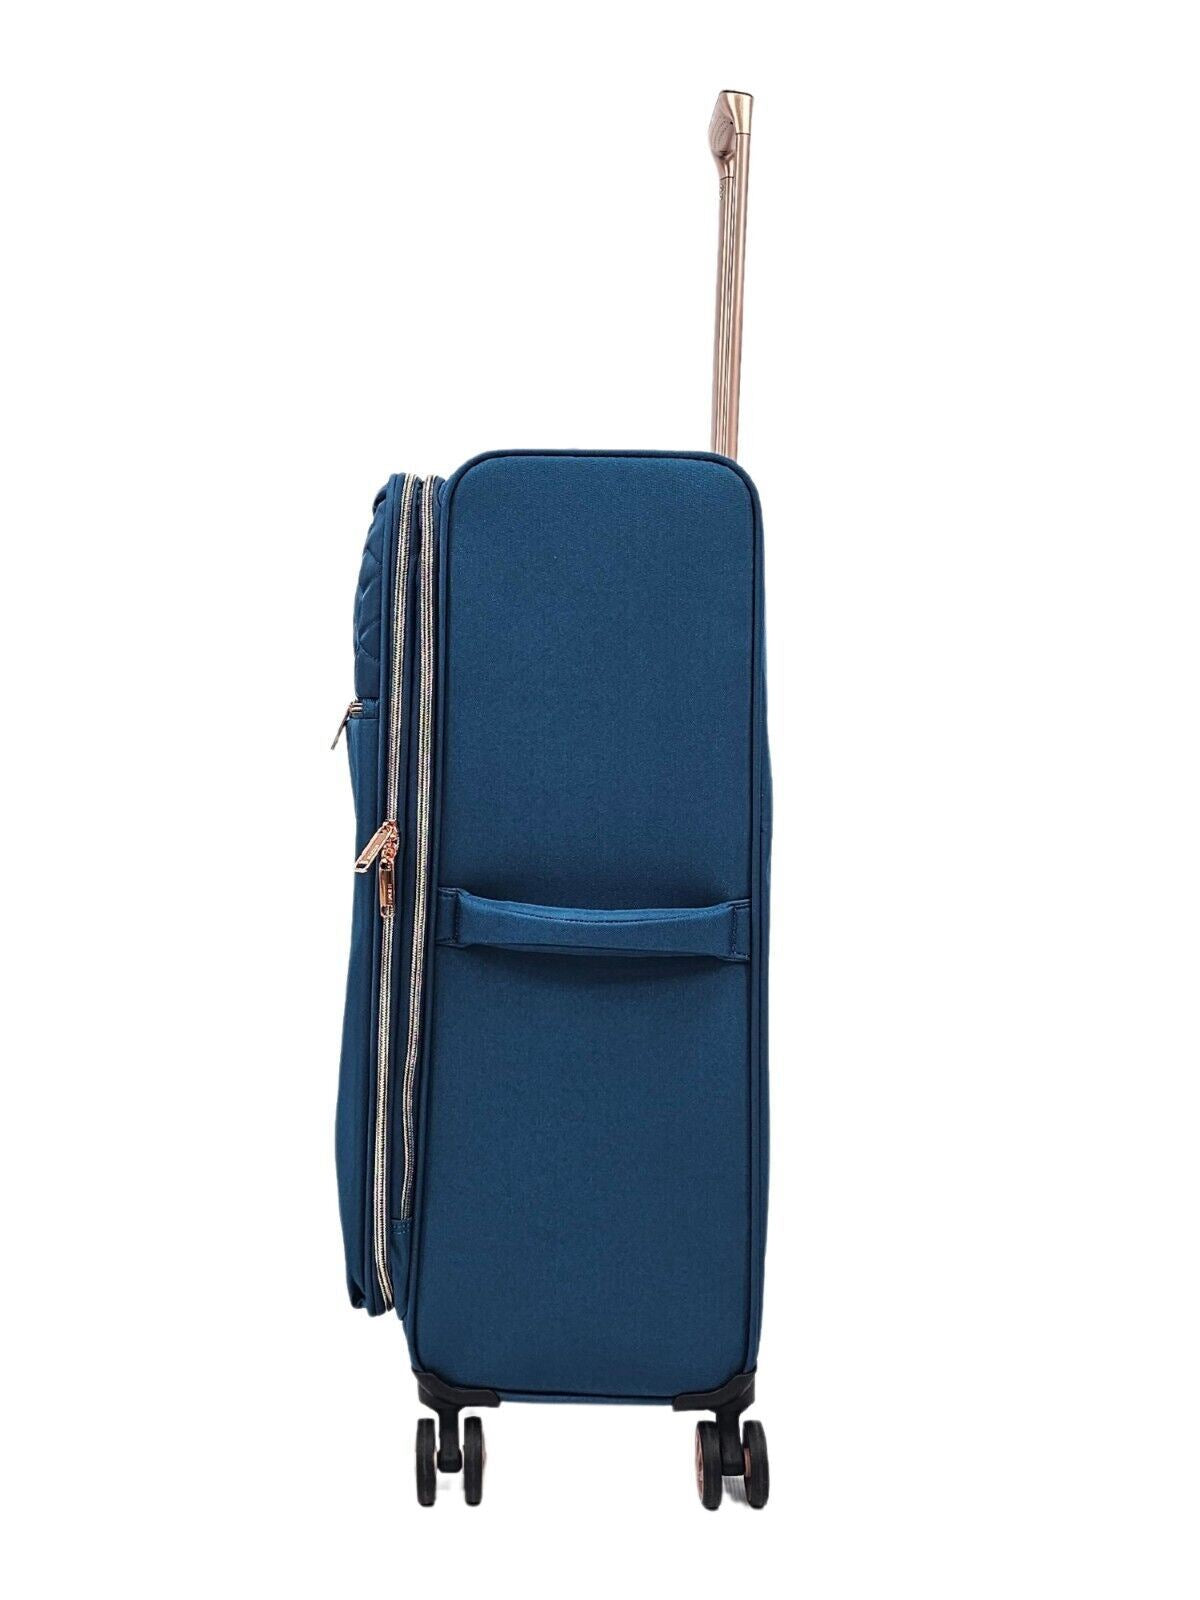 Cabin Teal blue Suitcases Set 4 Wheel Luggage Travel Lightweight Bags